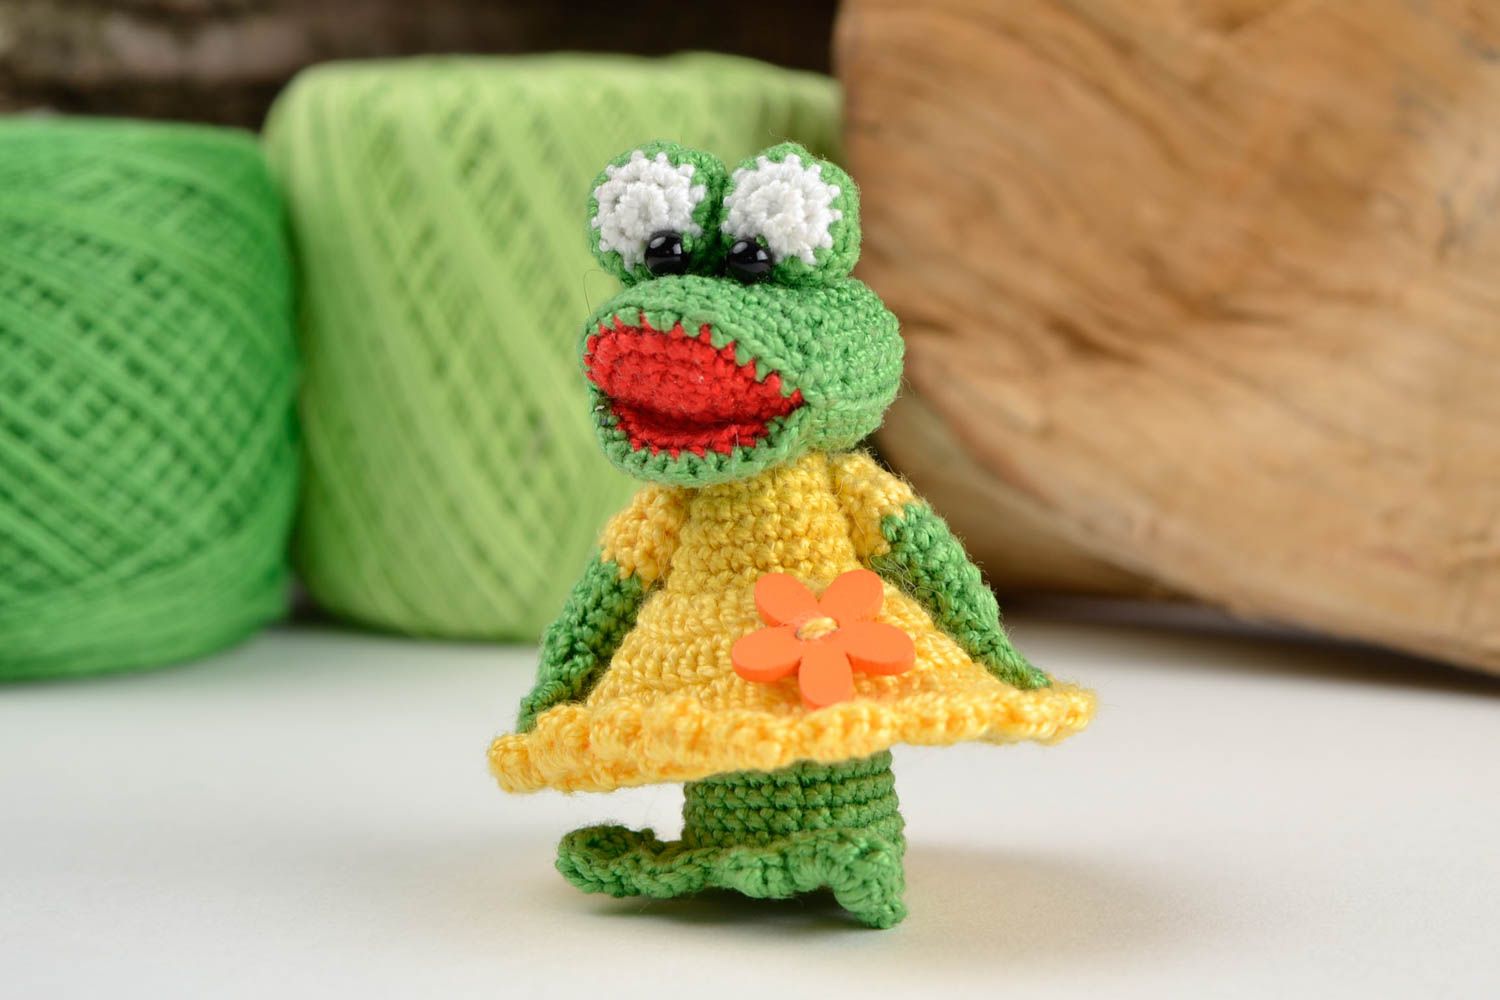 Handmade toy crocheted toys for children gift ideas unusual soft toys photo 1